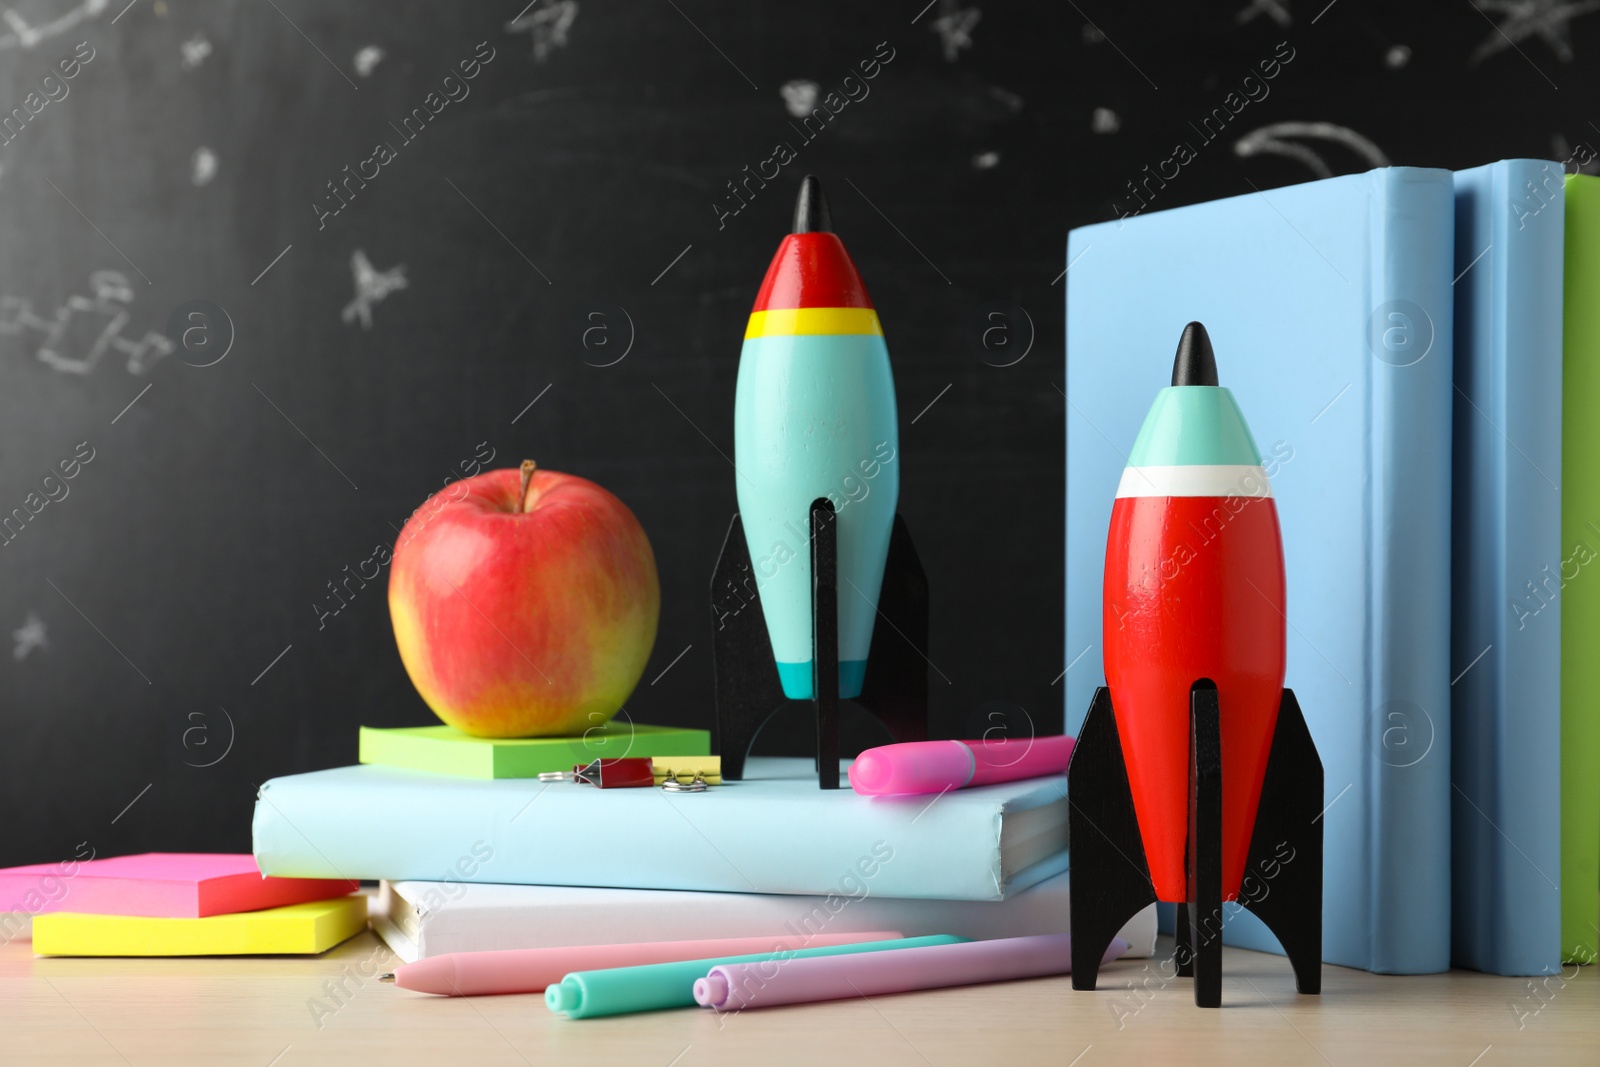 Photo of Bright toy rockets and school supplies on wooden table